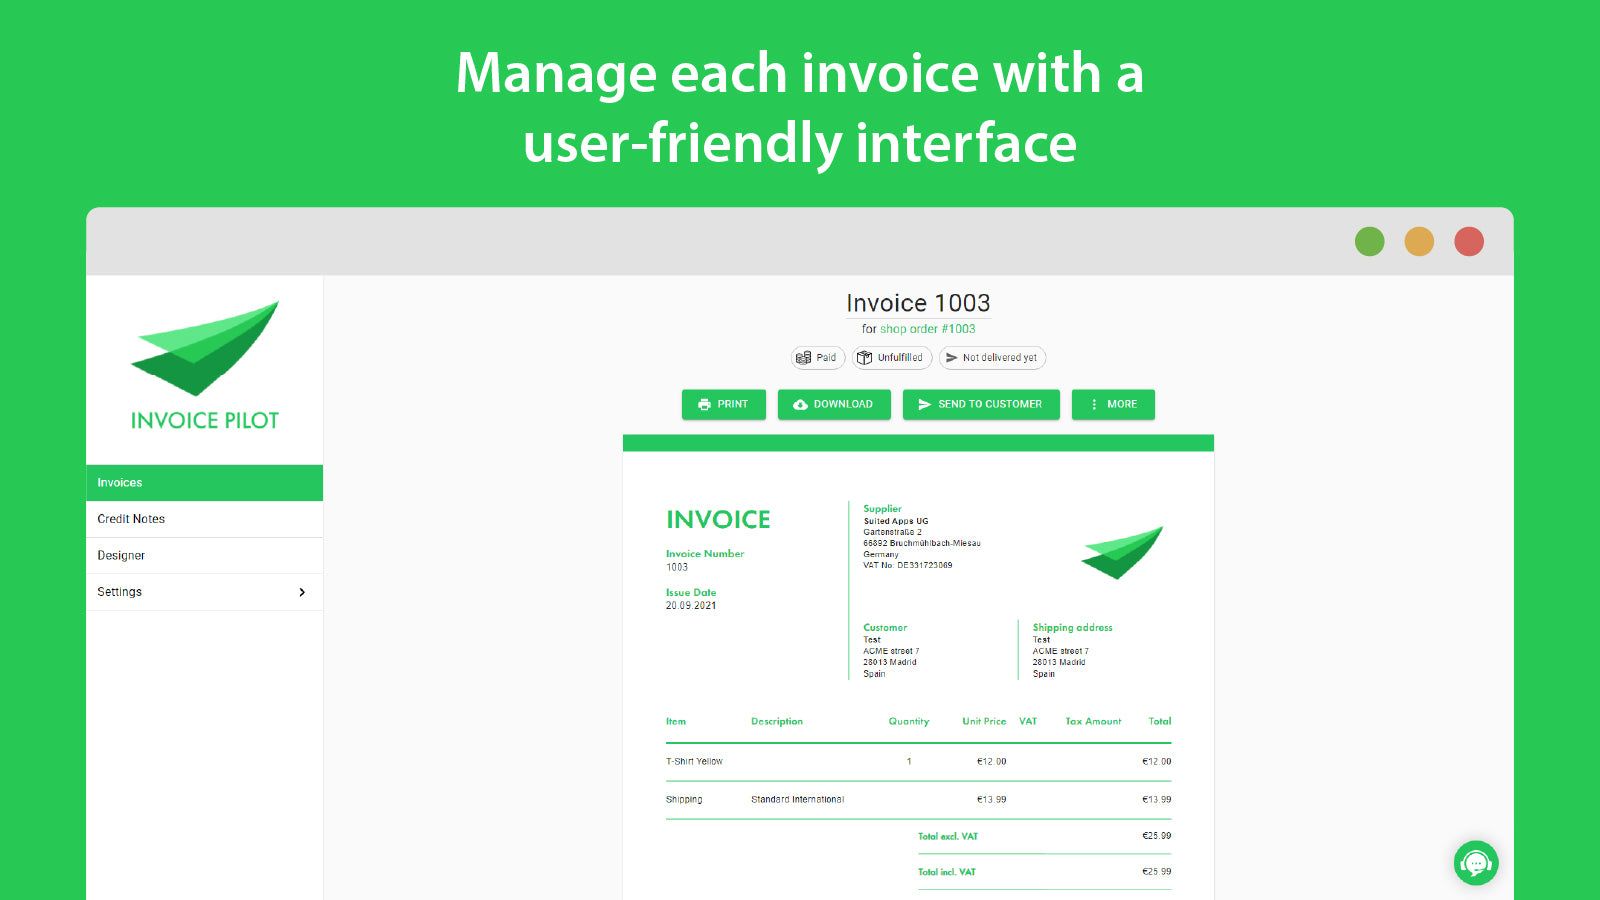 Manage each invoice with a user-friendly interface